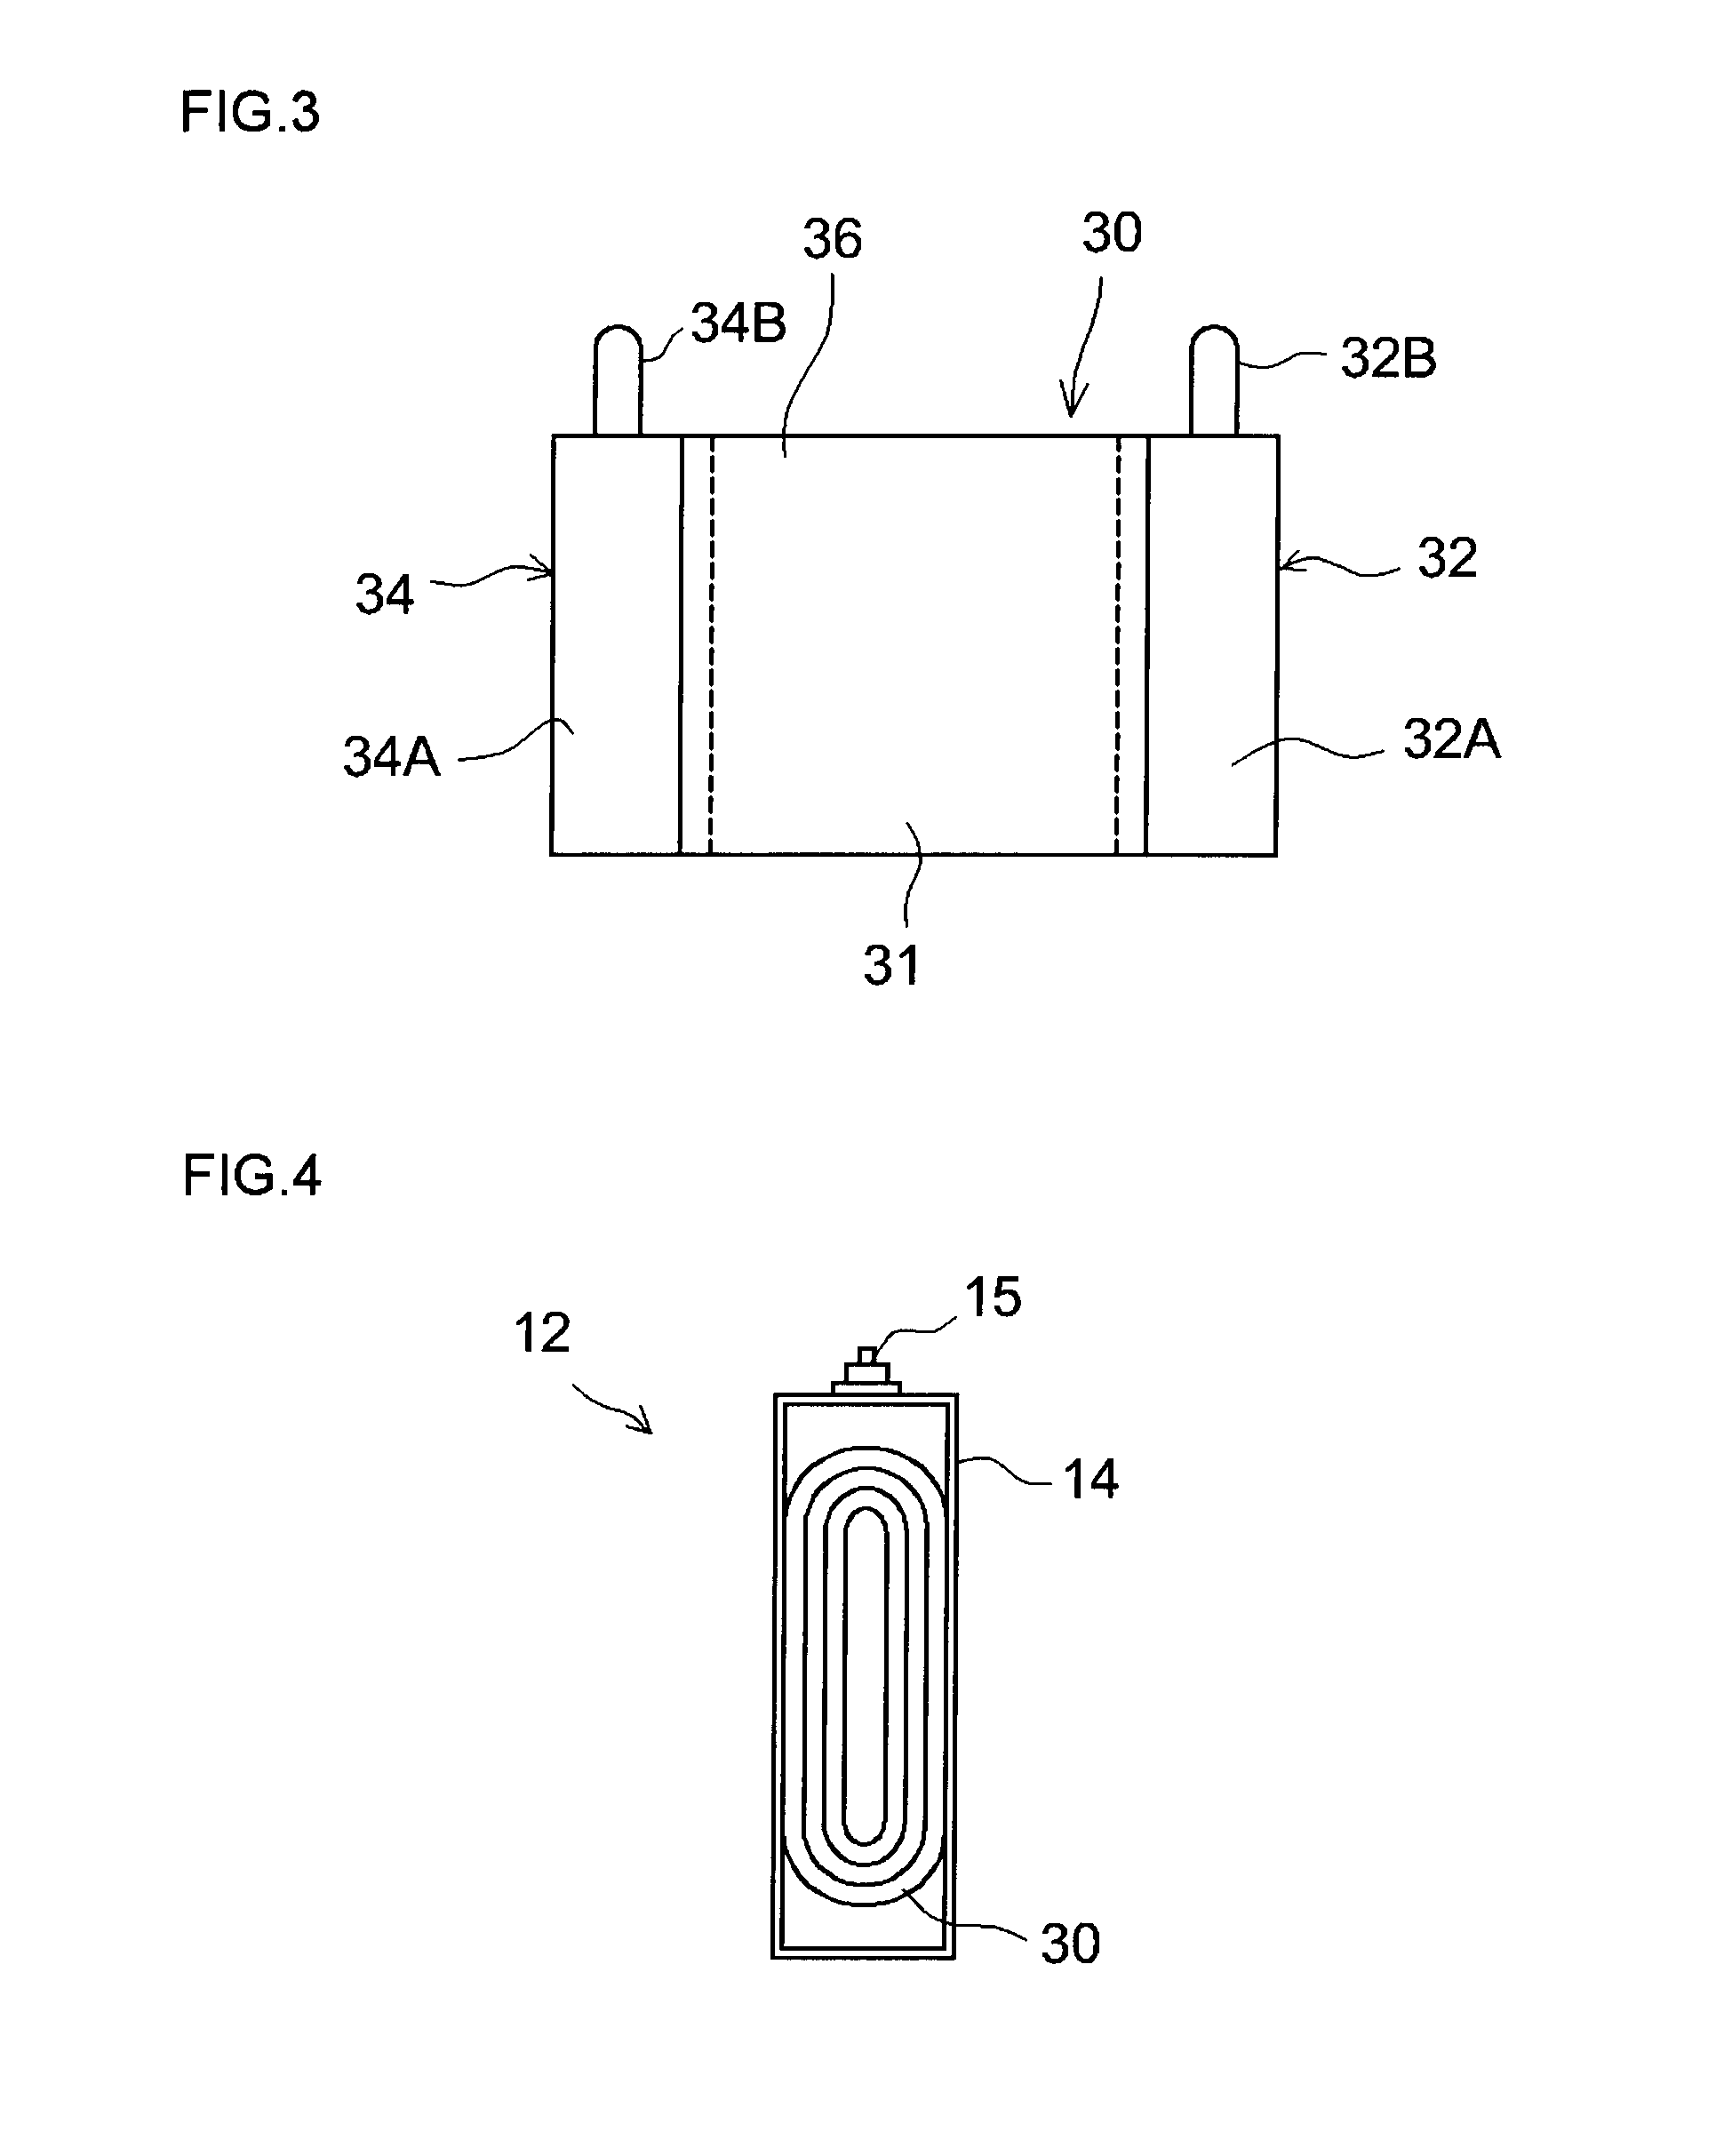 Battery assembly manufacturing method